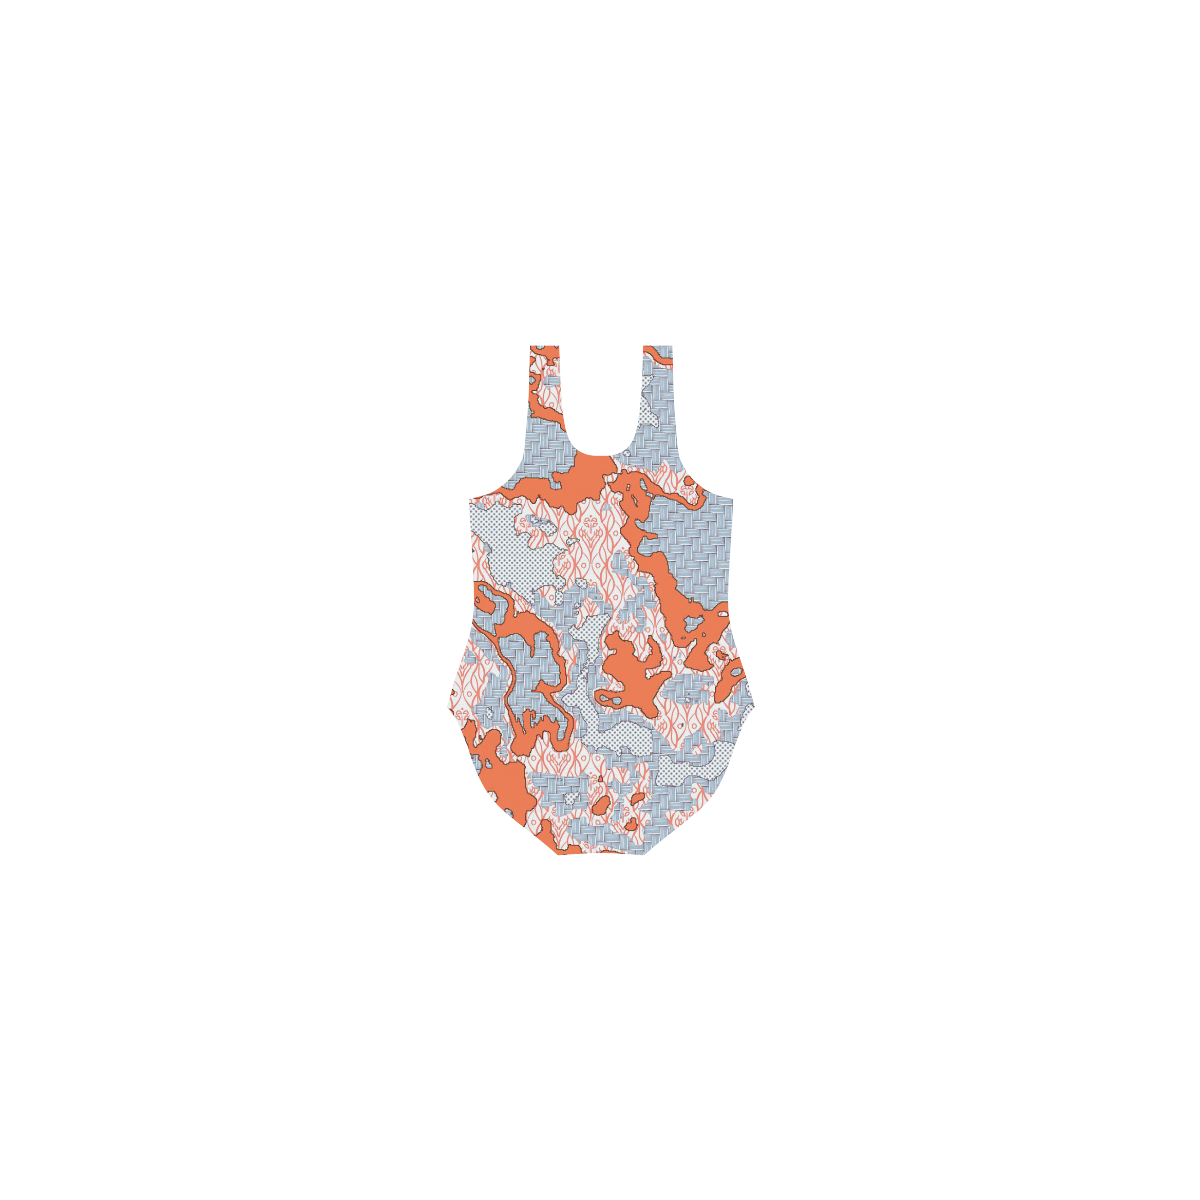 Unique abstract pattern mix 2E by FeelGood Vest One Piece Swimsuit (Model S04)